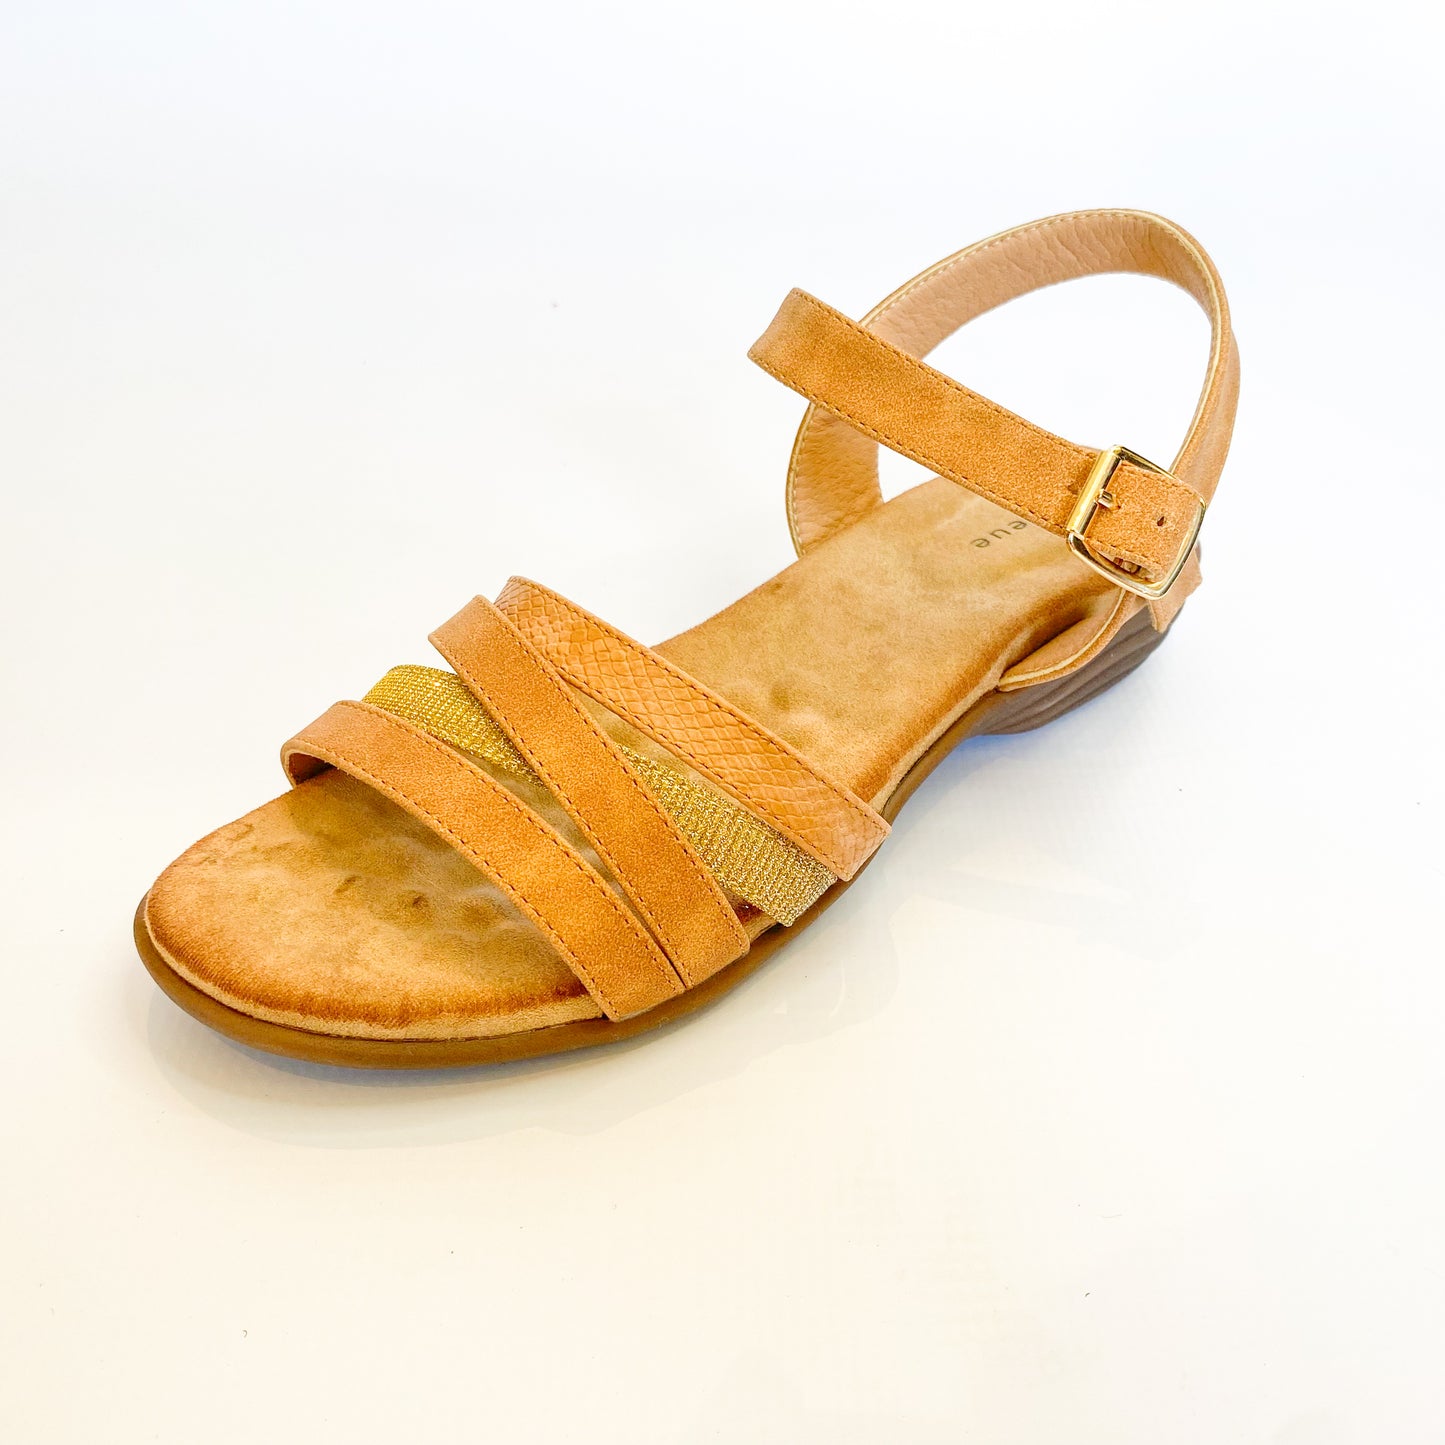 Queue tan and gold strappy sandal